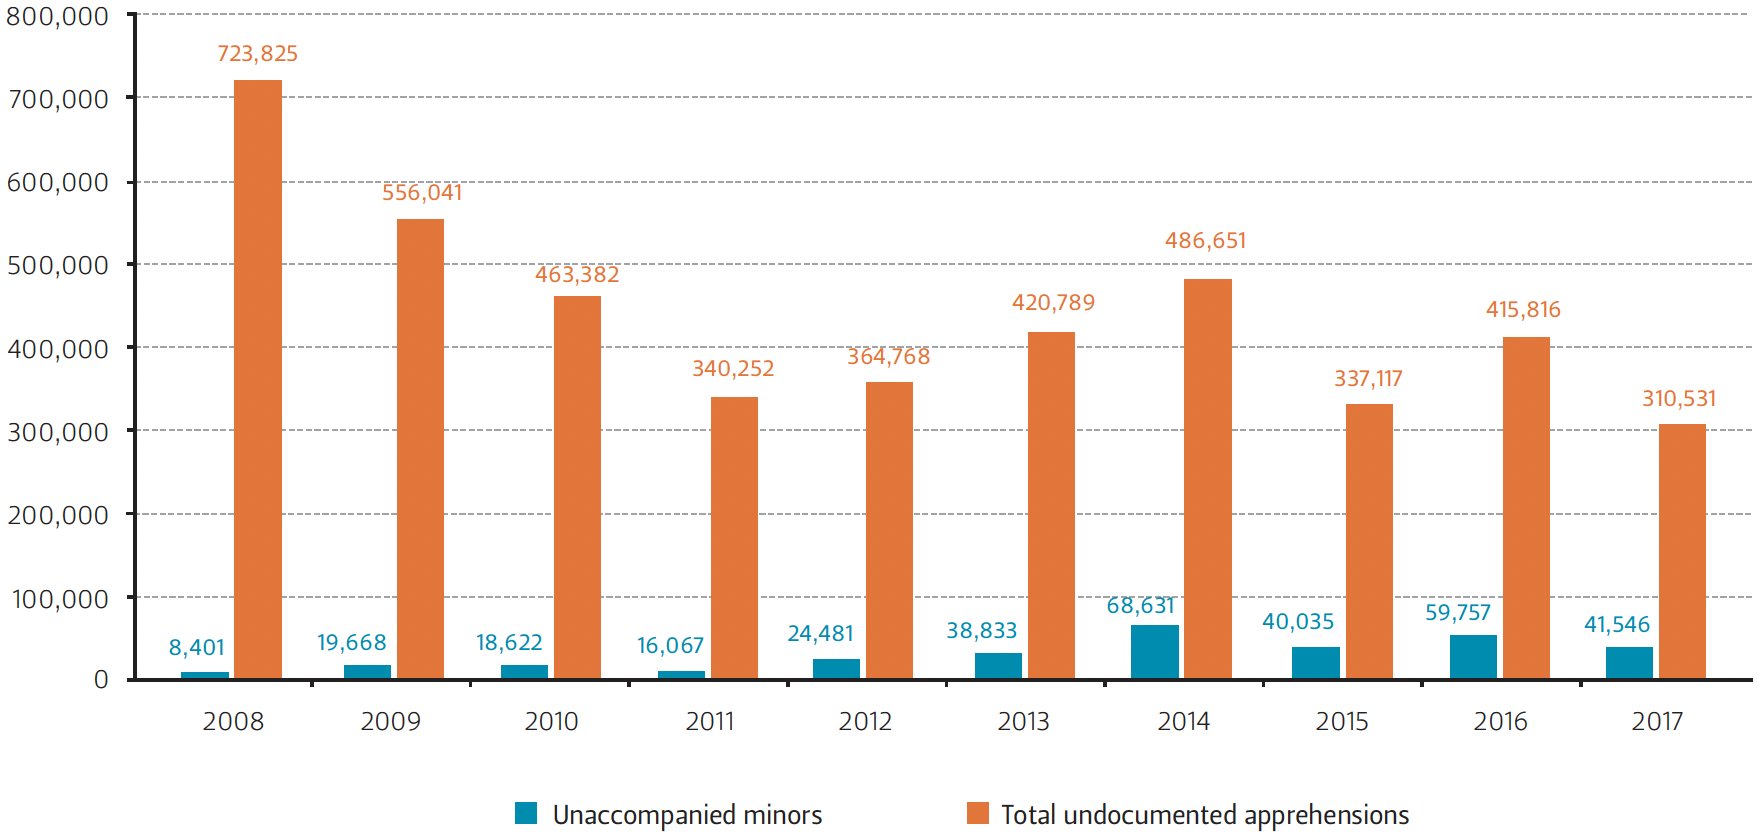 This graph compares total undocumented and unaccompanied minor apprehensions in the U.S.